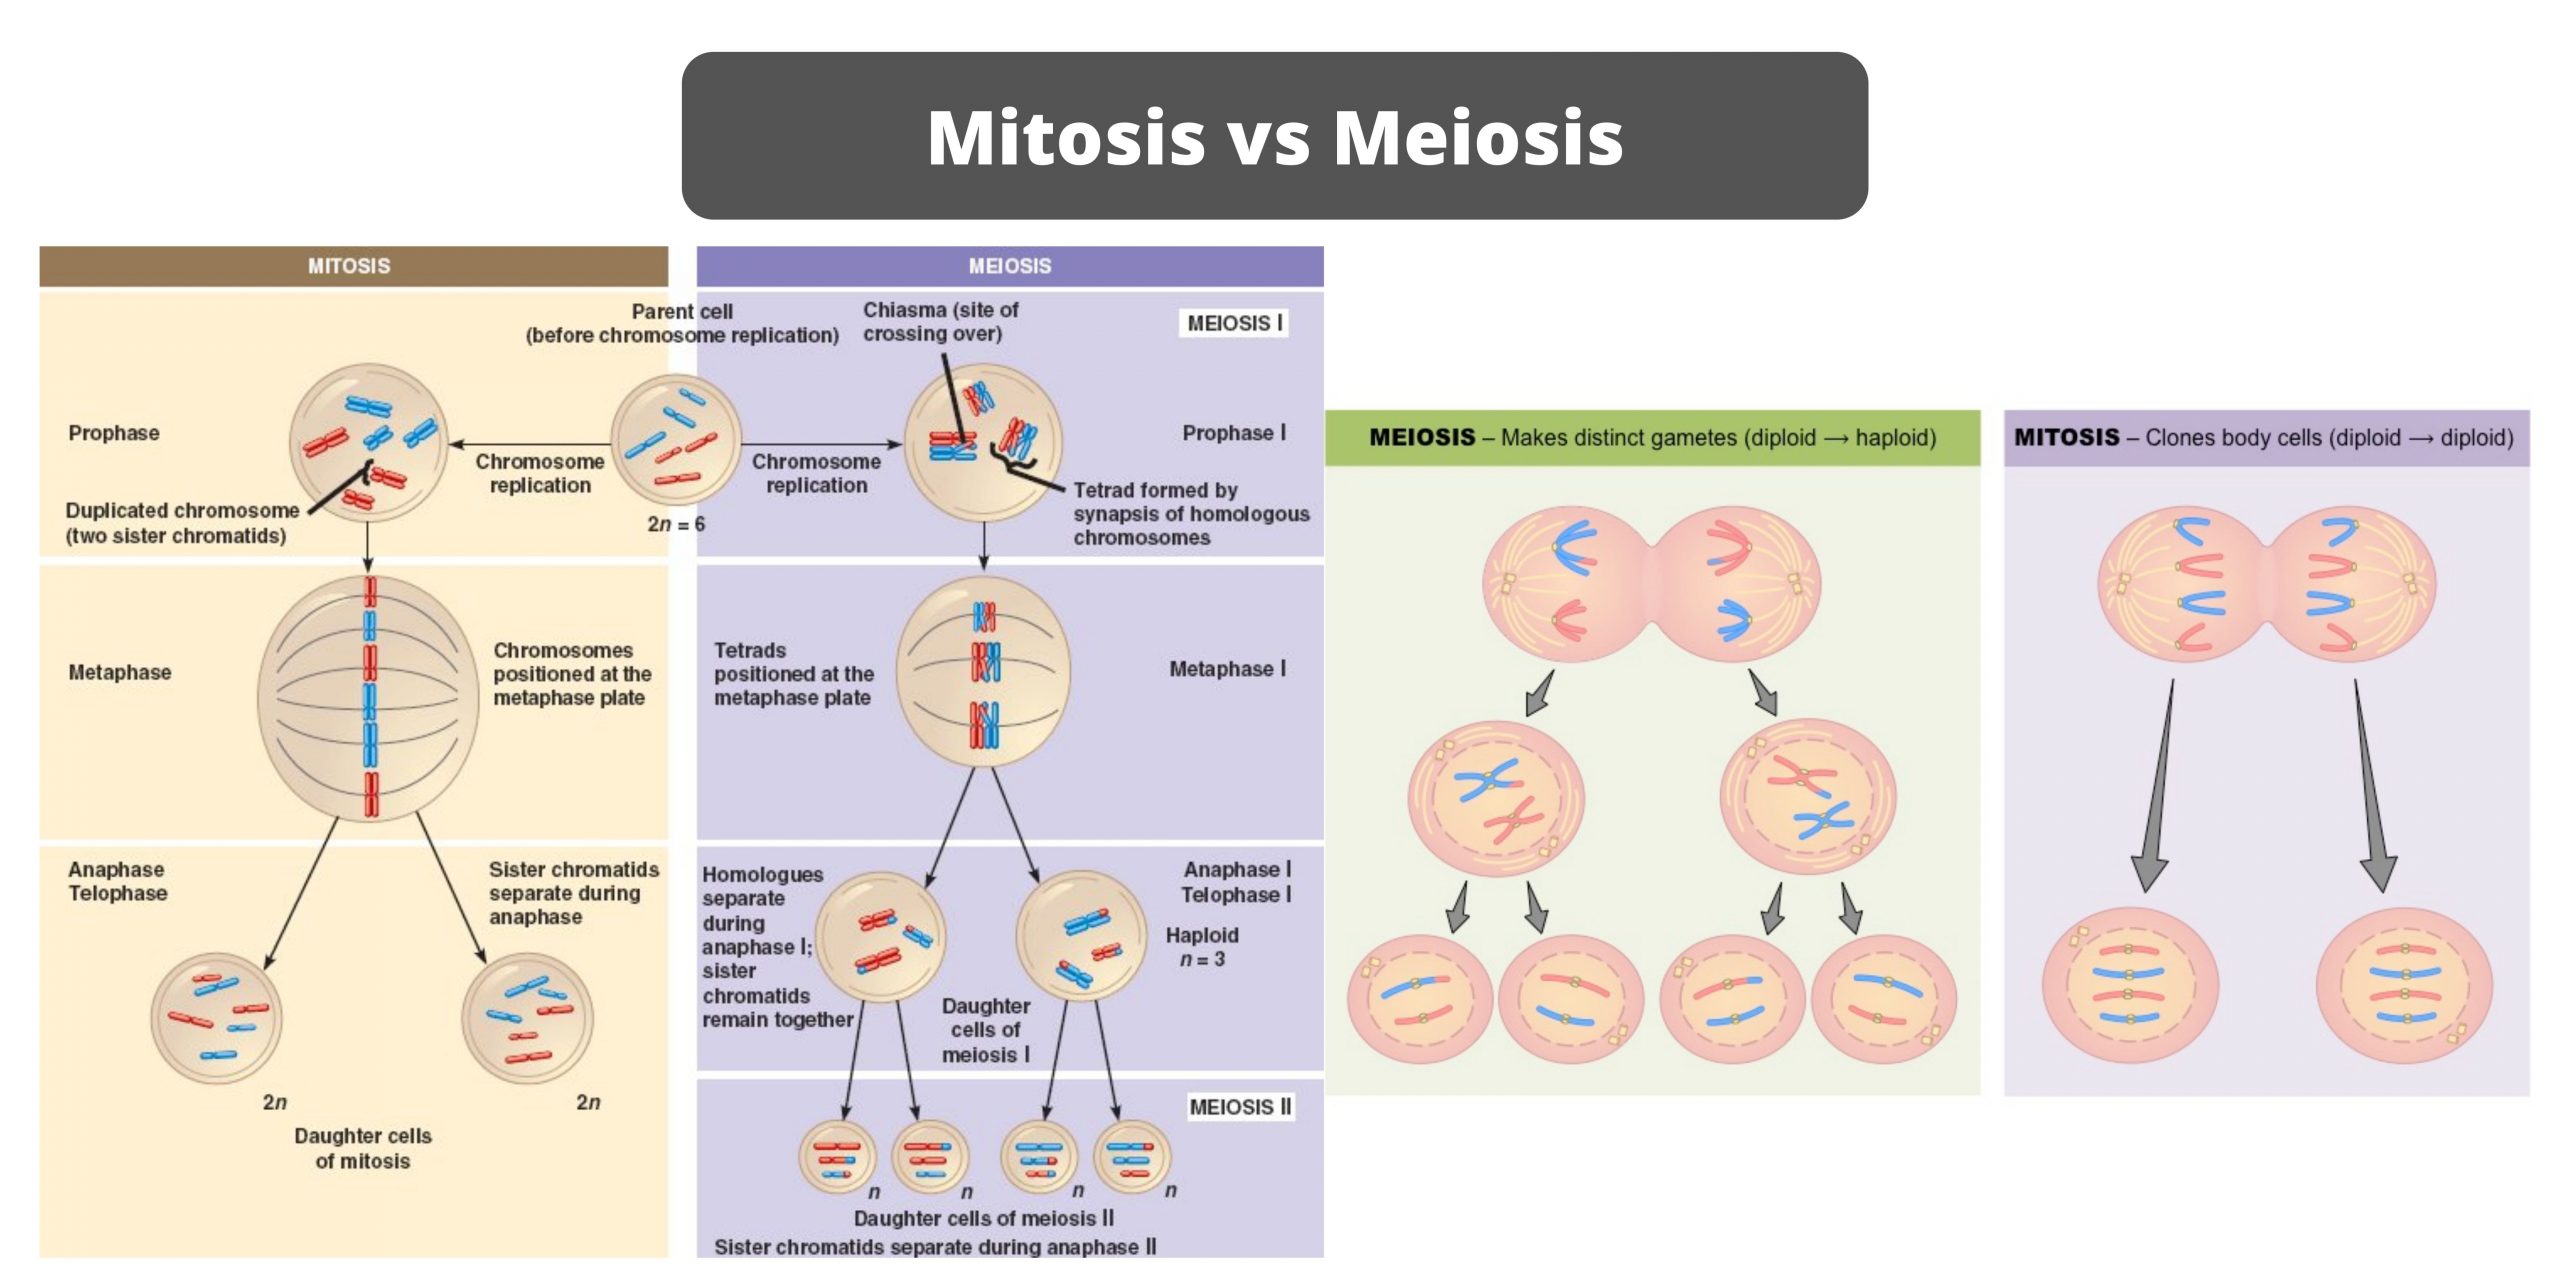 Differences between Mitosis and Meiosis - Mitosis vs Meiosis